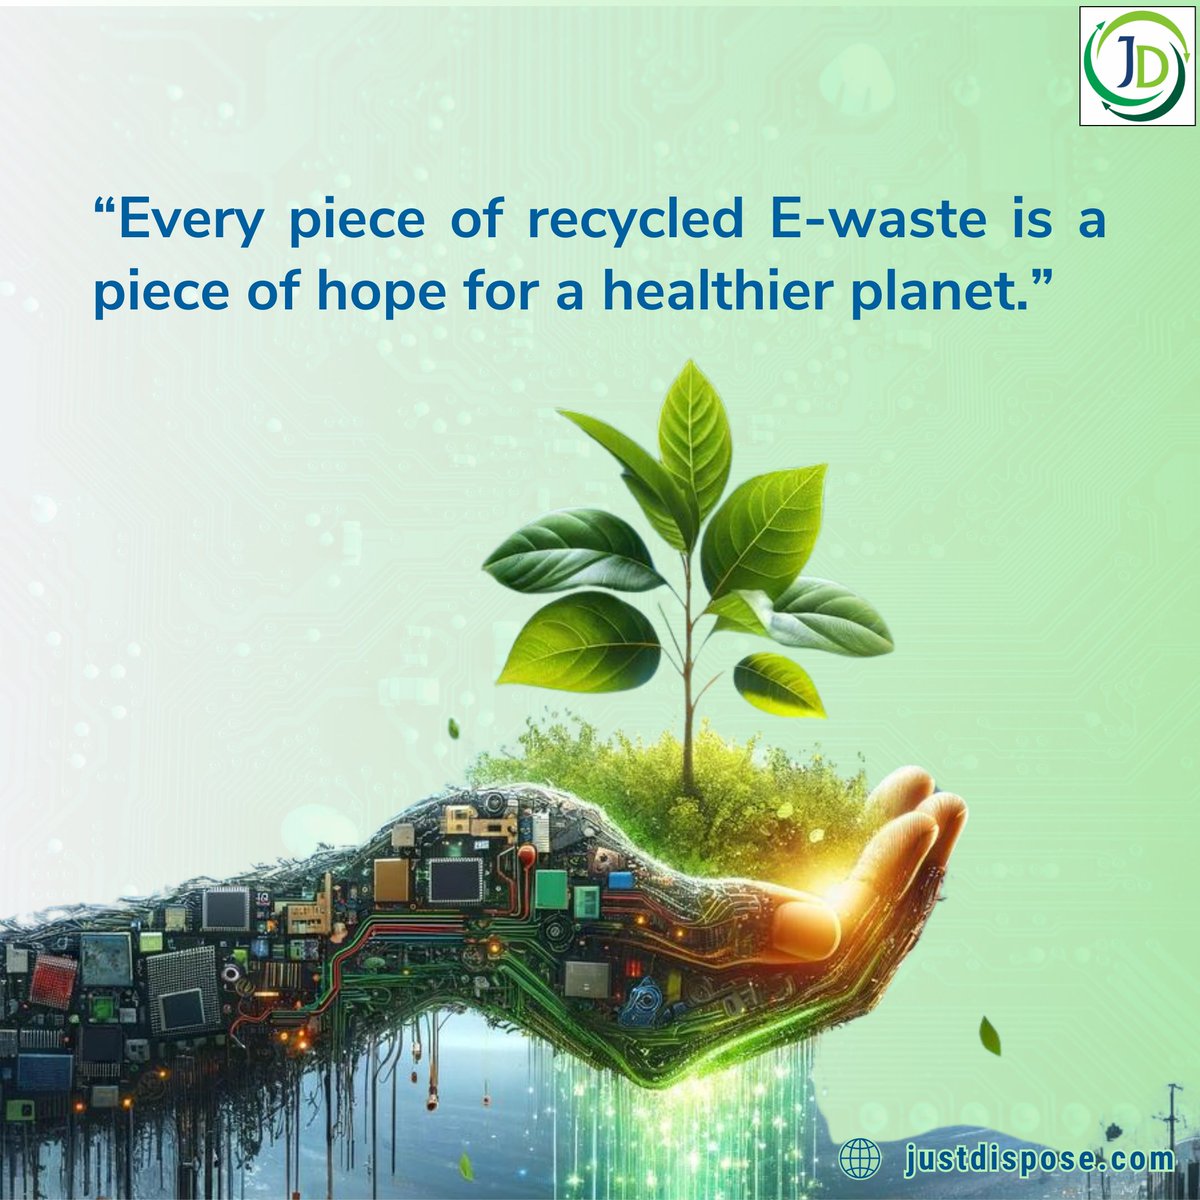 Don't let your old #electronics be a burden on the #planet. #Recycle them and unleash their potential for good.
.
 #ewaste #recycling #electronicwaste #ewasterecycling #itrecycling #officebin #sustainability #reuse #environment #circulareconomy #zerowaste #reduce #laptoprecycling